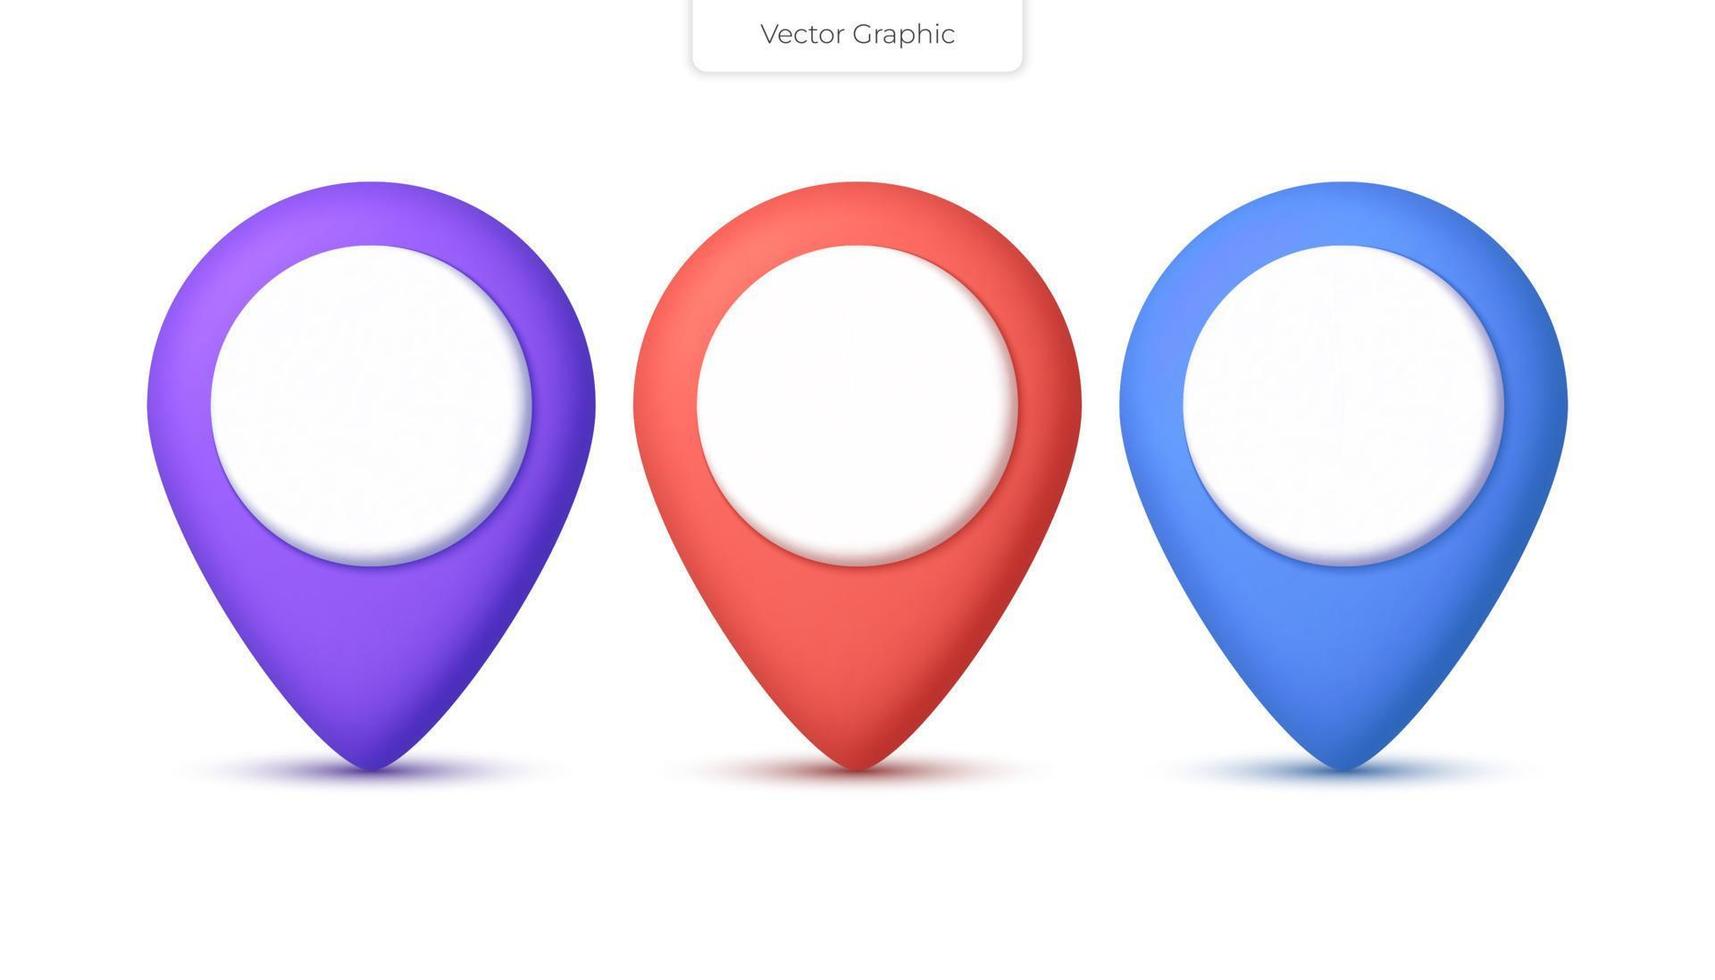 3D icon set features locator pins for maps, perfect for rendering location marks and navigation signs. They represent geo-location and travel guidance, and come in a minimalistic cartoon vector style.